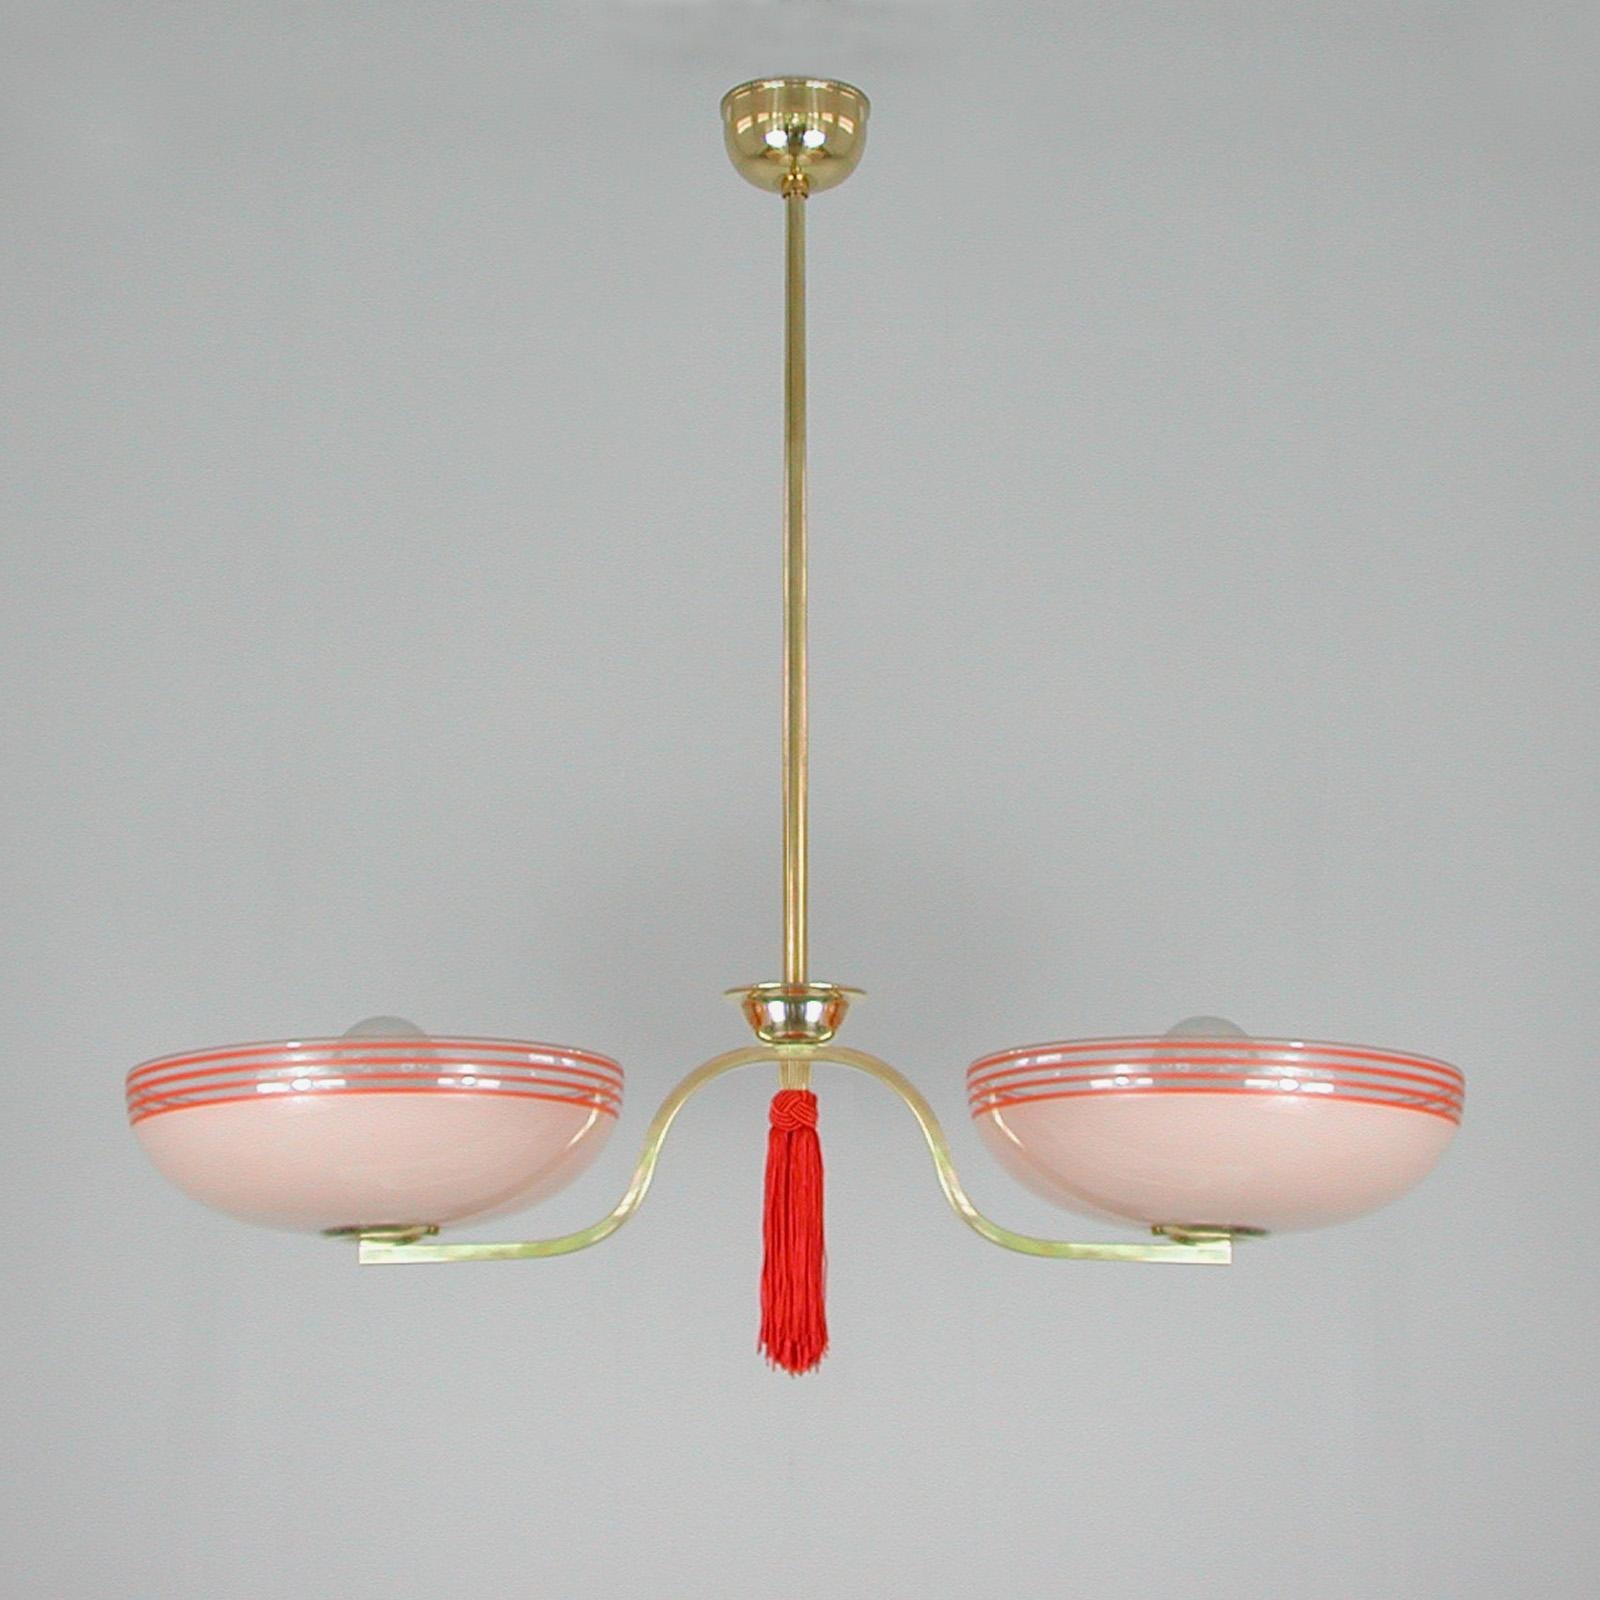 This unusual fixture was designed and manufactured in Germany in the 1930s during the Bauhaus period.
It features two pale pink and red glass lampshades, a ruby red tassel and brass hardware.

The light has been rewired and requires two E27